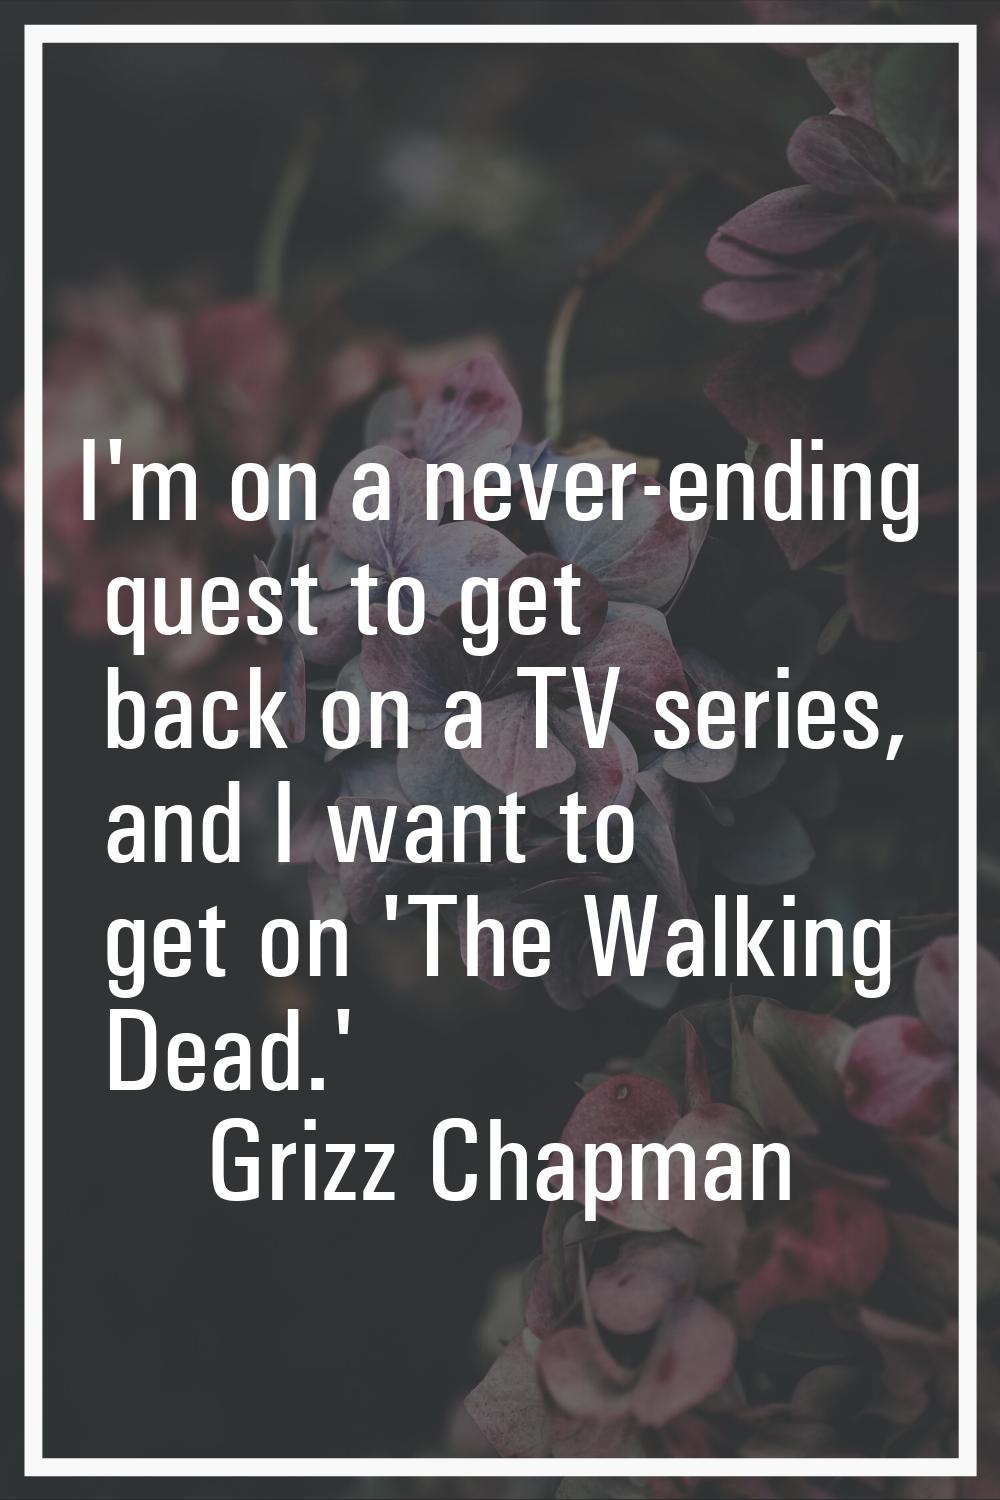 I'm on a never-ending quest to get back on a TV series, and I want to get on 'The Walking Dead.'